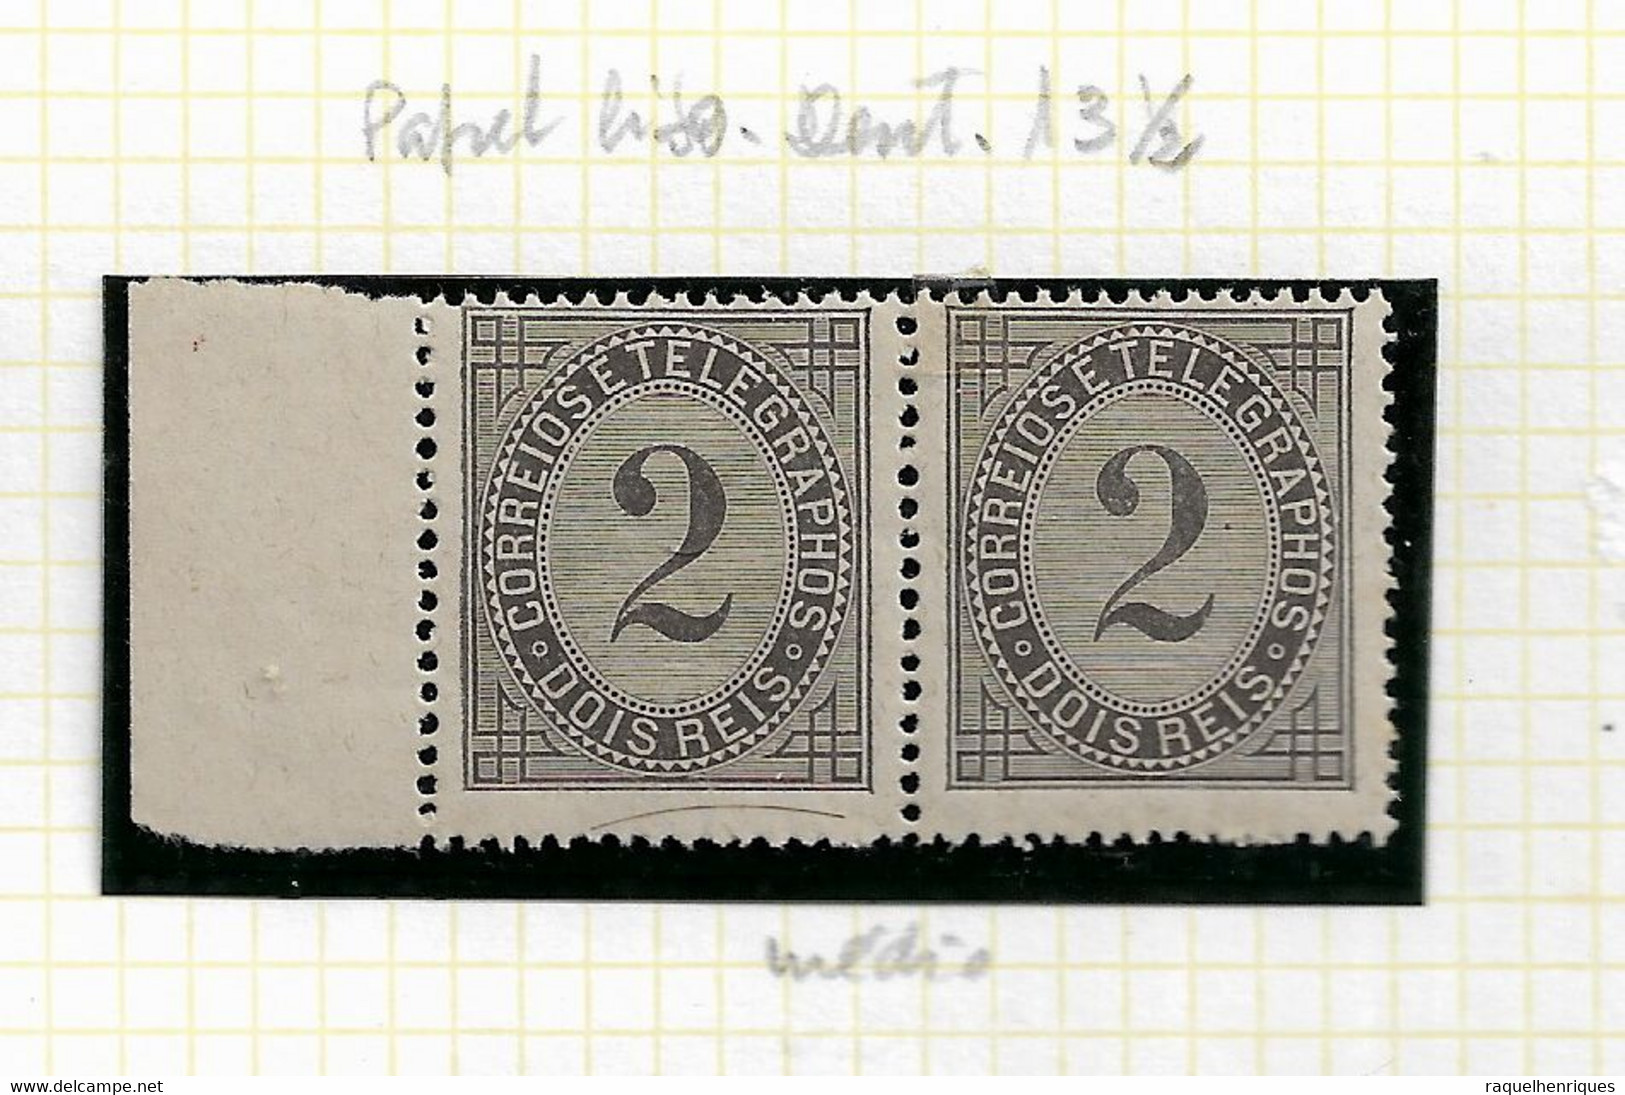 PORTUGAL STAMP - 1884 Telegraph Stamp P.LISO Perf:13½  Md#59a PAIR MNH (LPT1#195) - Neufs